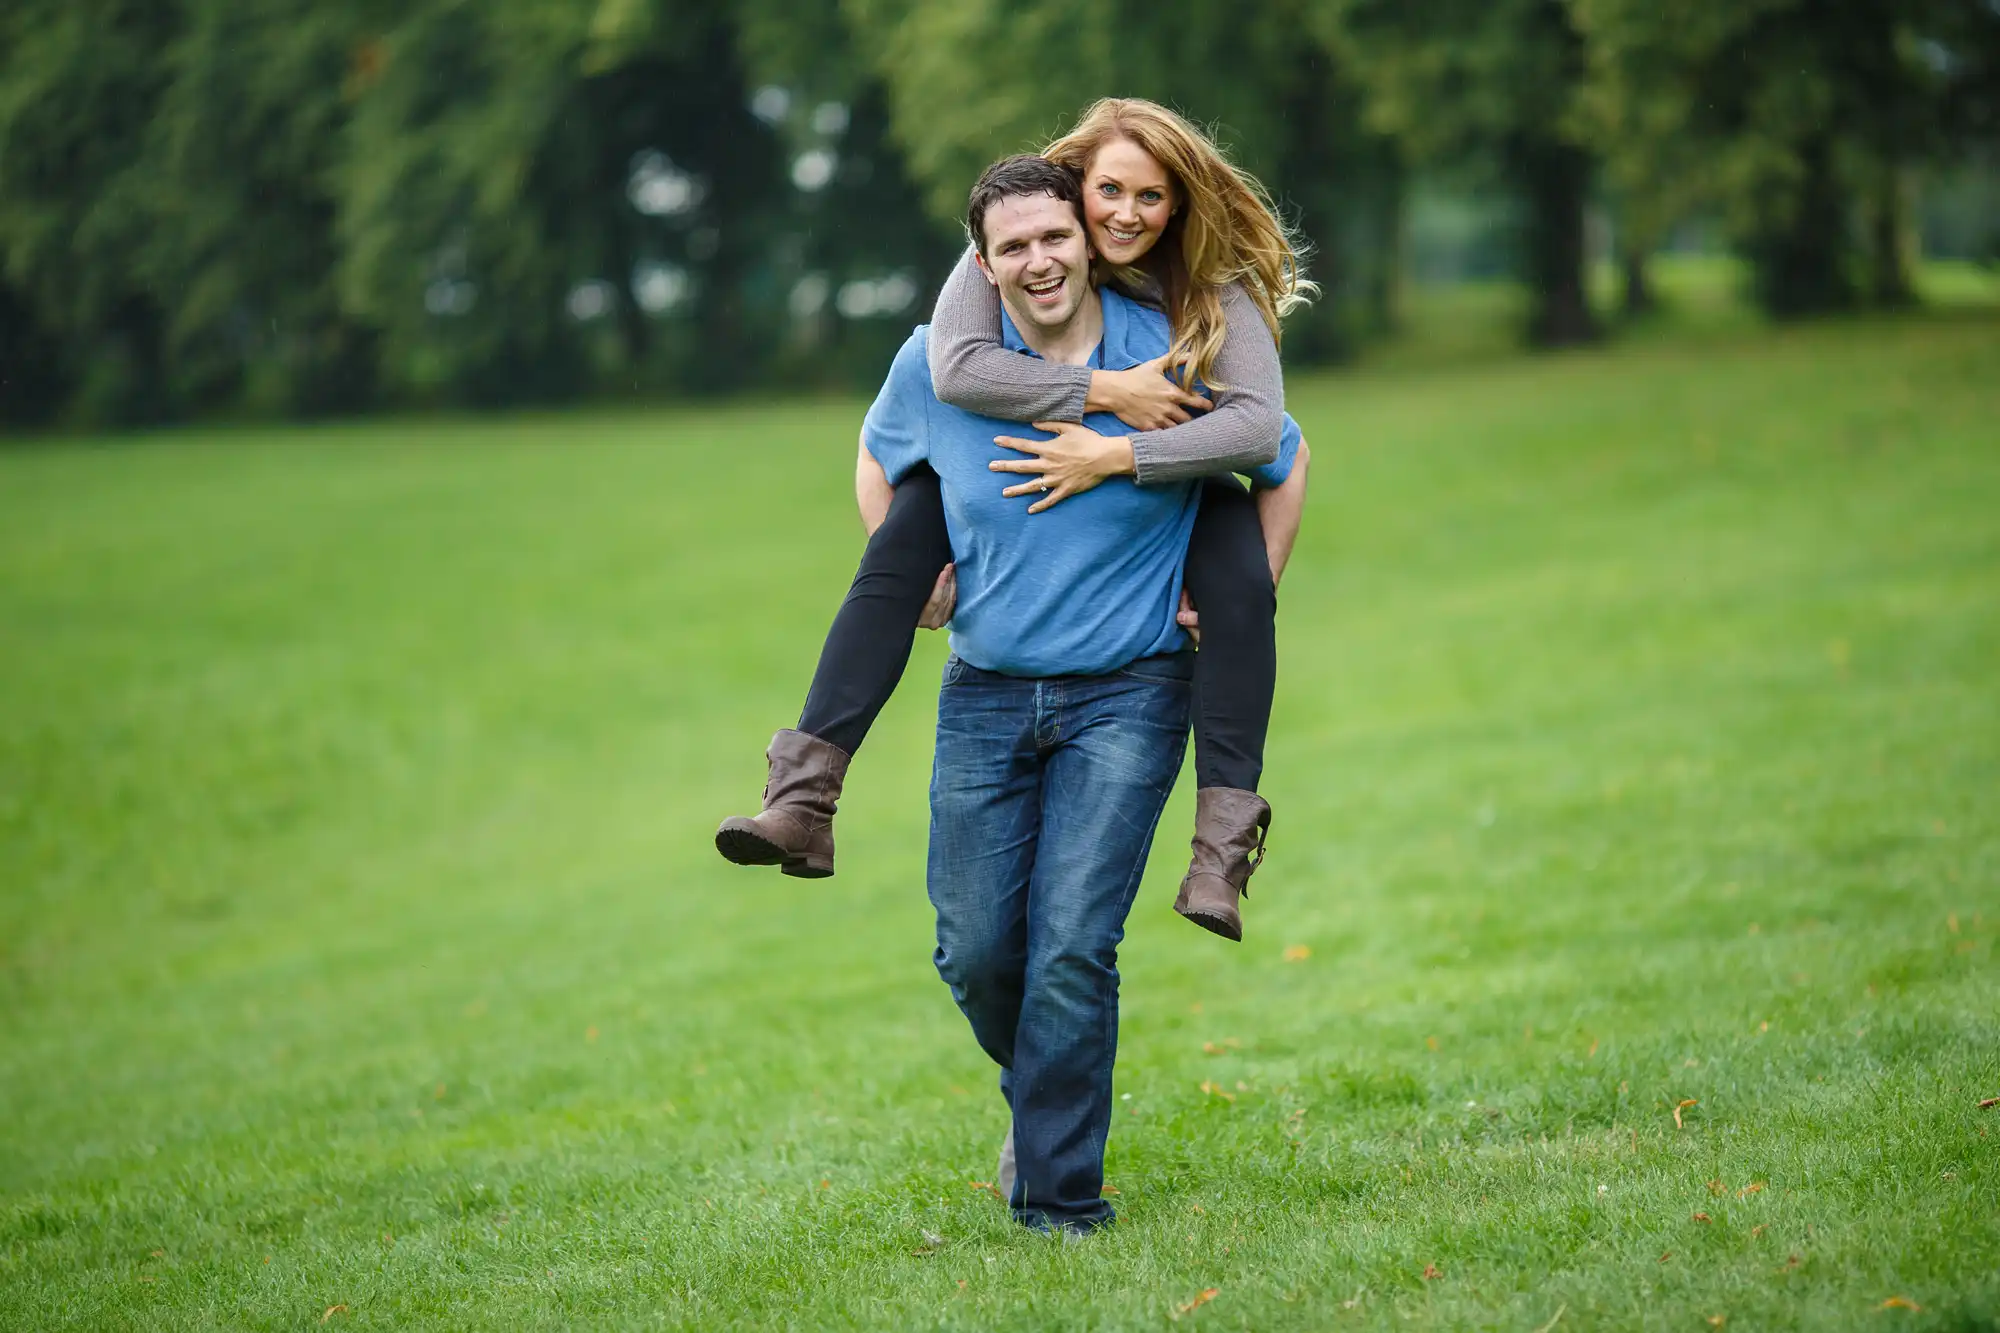 A man carrying a woman on his back, both smiling, in a lush green park.